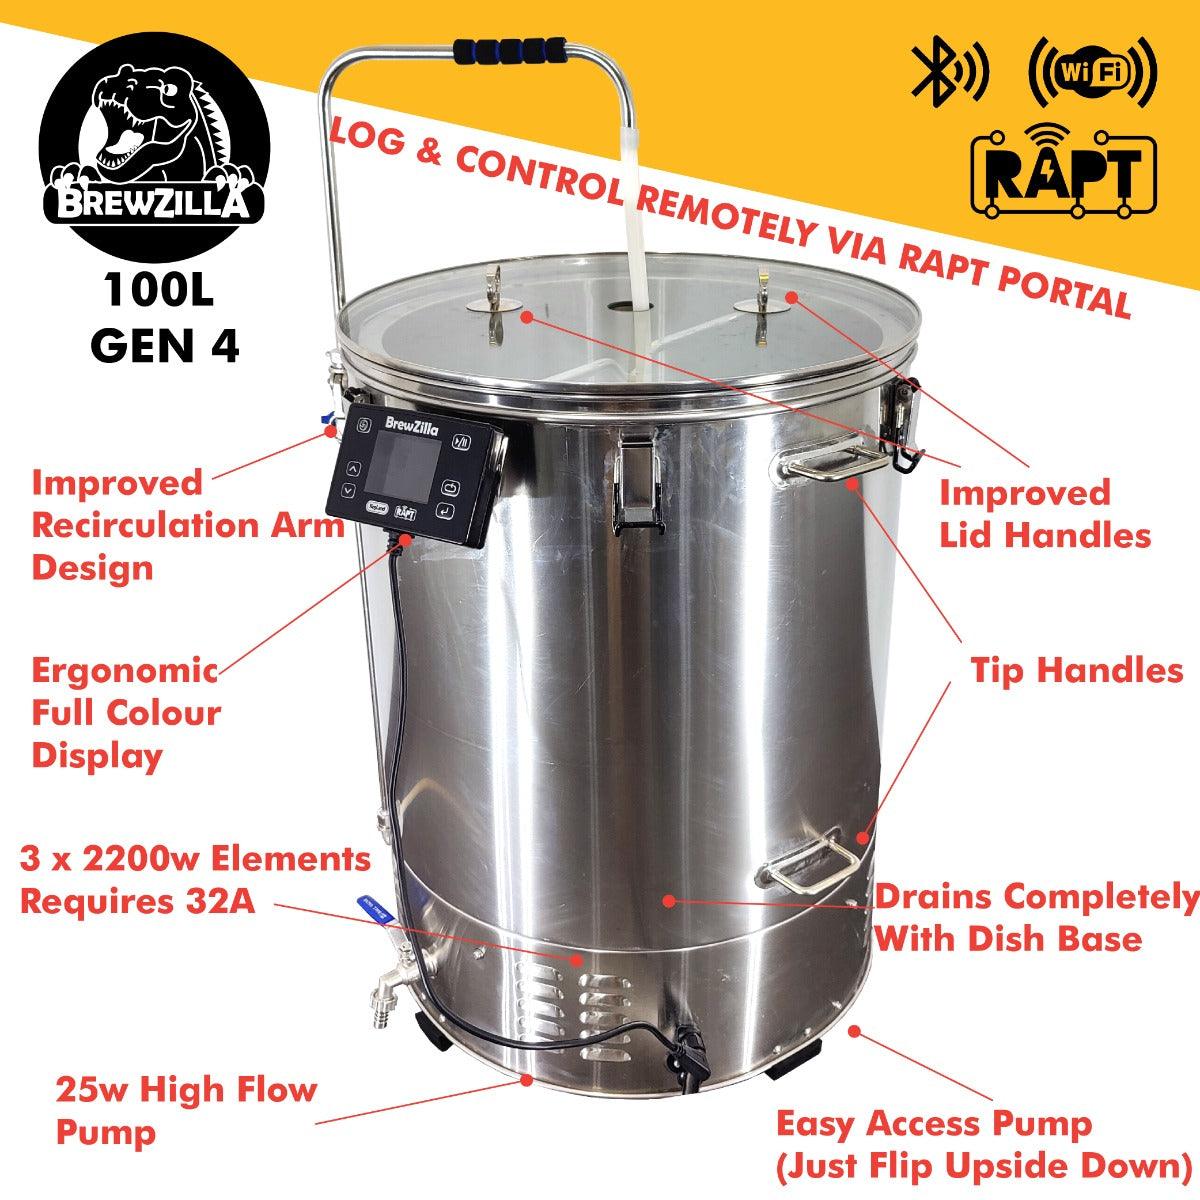 The largest single vessel home brewery in the BrewZilla range, Powered by 32a Single Phase or 10a Three Phase when installed by a qualified electrician.